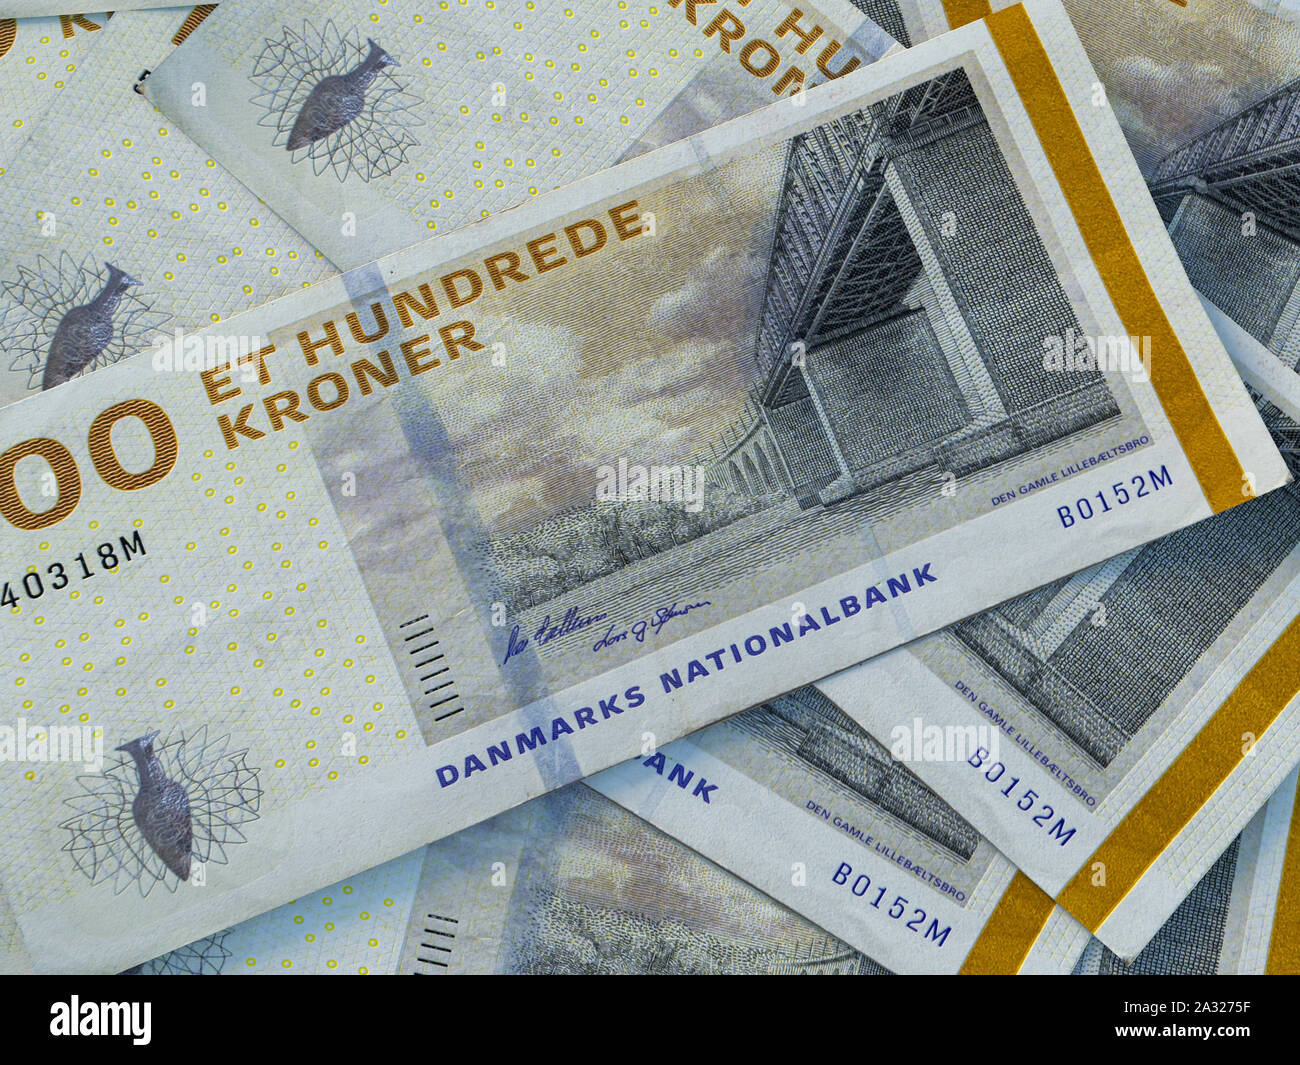 Danish krone.The official currency of Denmark, Greenland, and the Faroe Islands. Financial background. DKK. Stock Photo